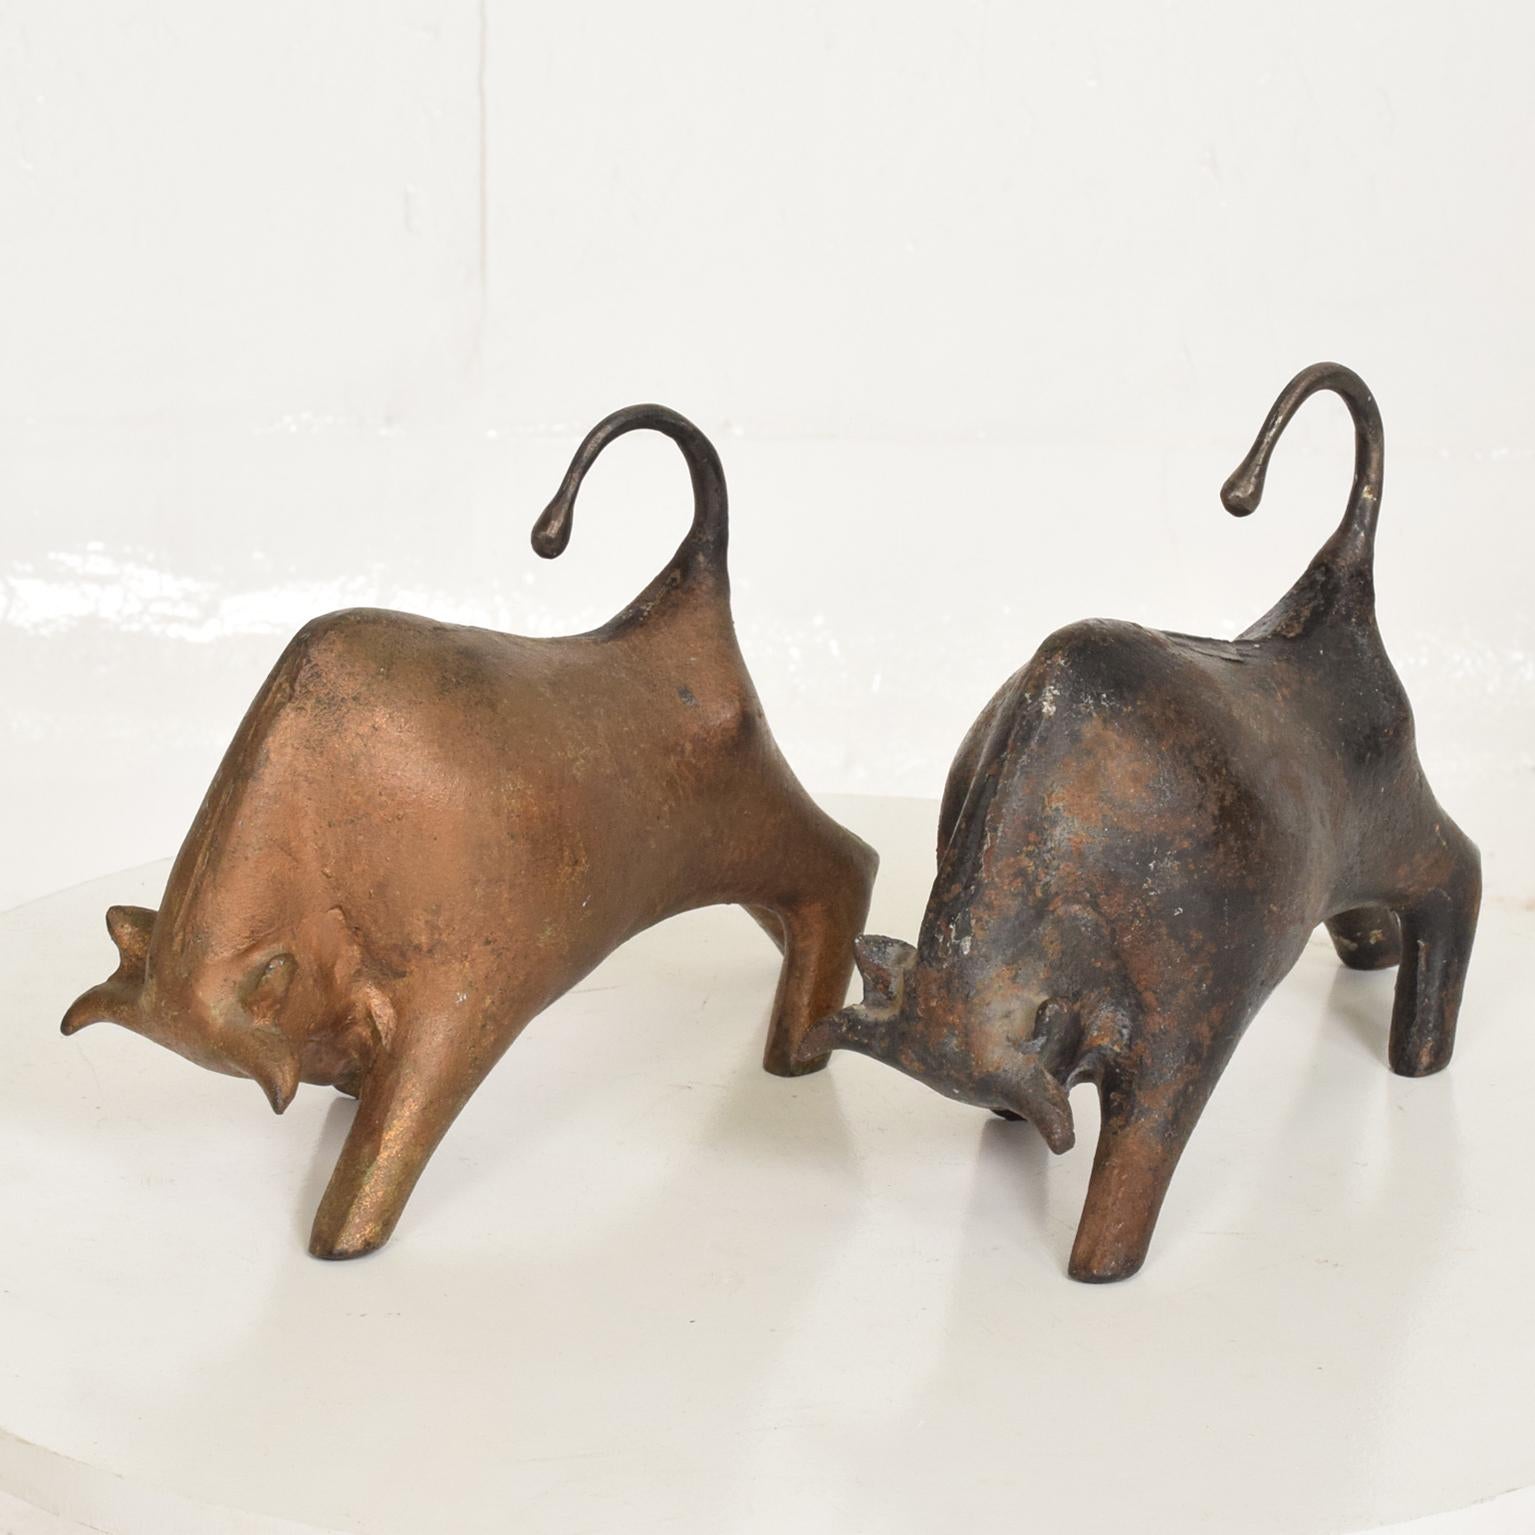 For your consideration, Mid-Century Modern sculptural iron cast bulls bookends. Made in Japan circa 1960s.

Stamped: JAPAN. 

Dimensions 7